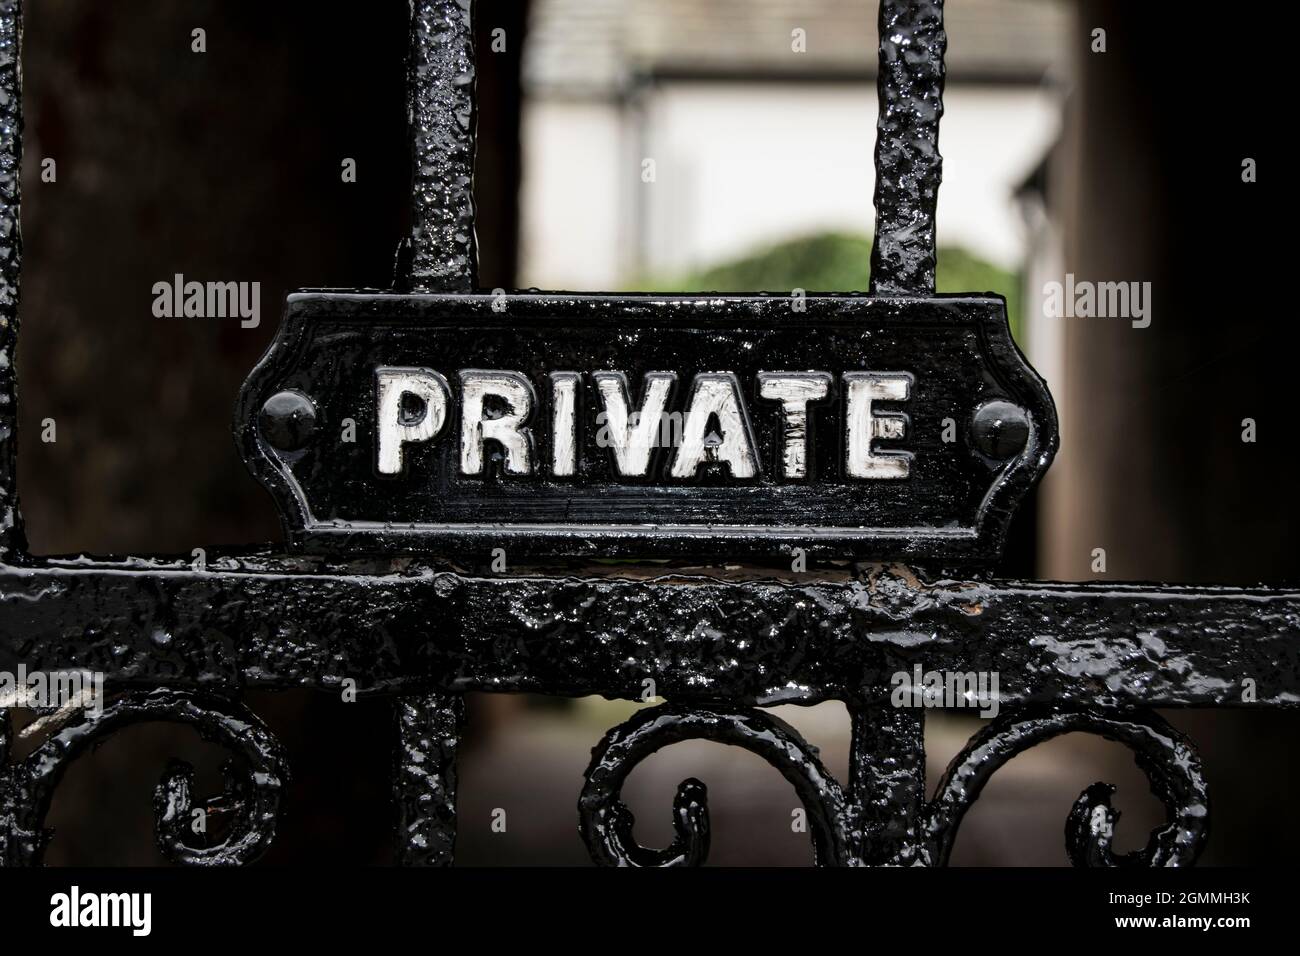 Private signage on a black metal ornamental gate Stock Photo